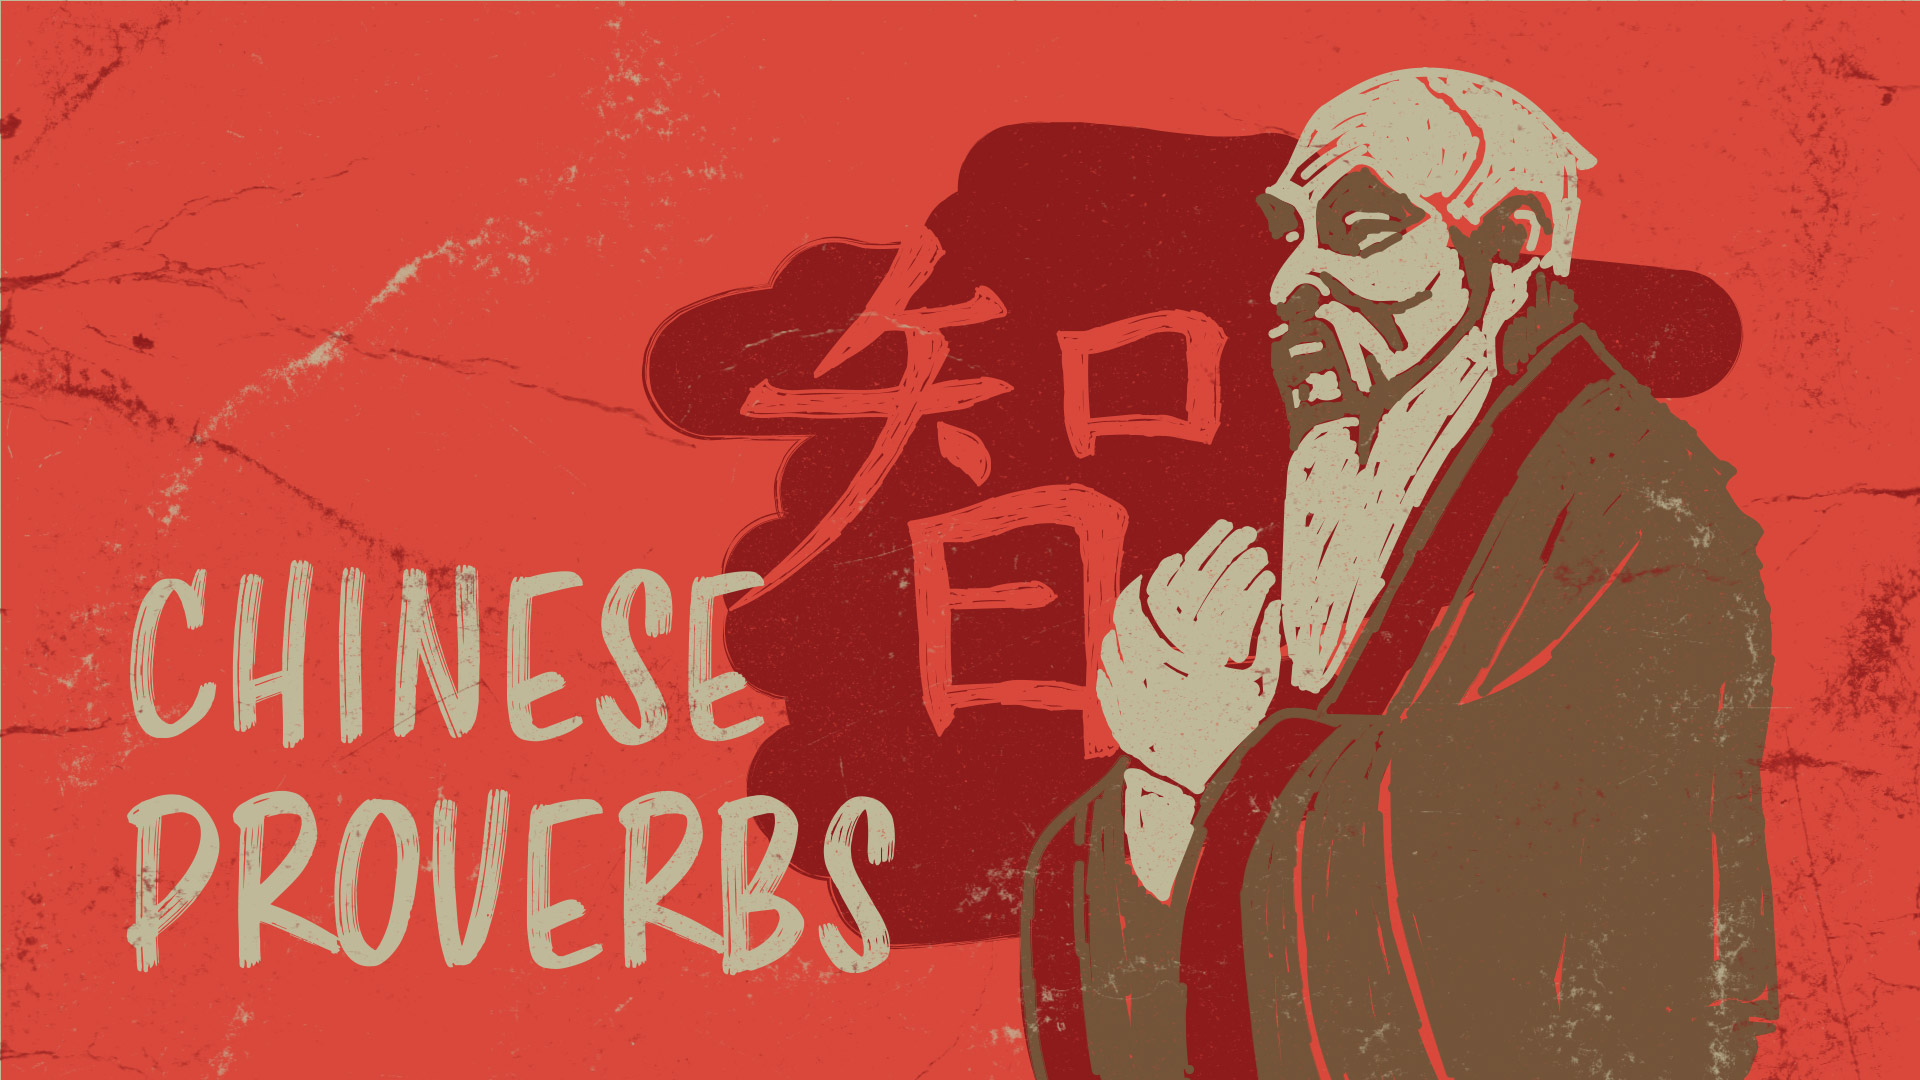 chinese proverbs quotes